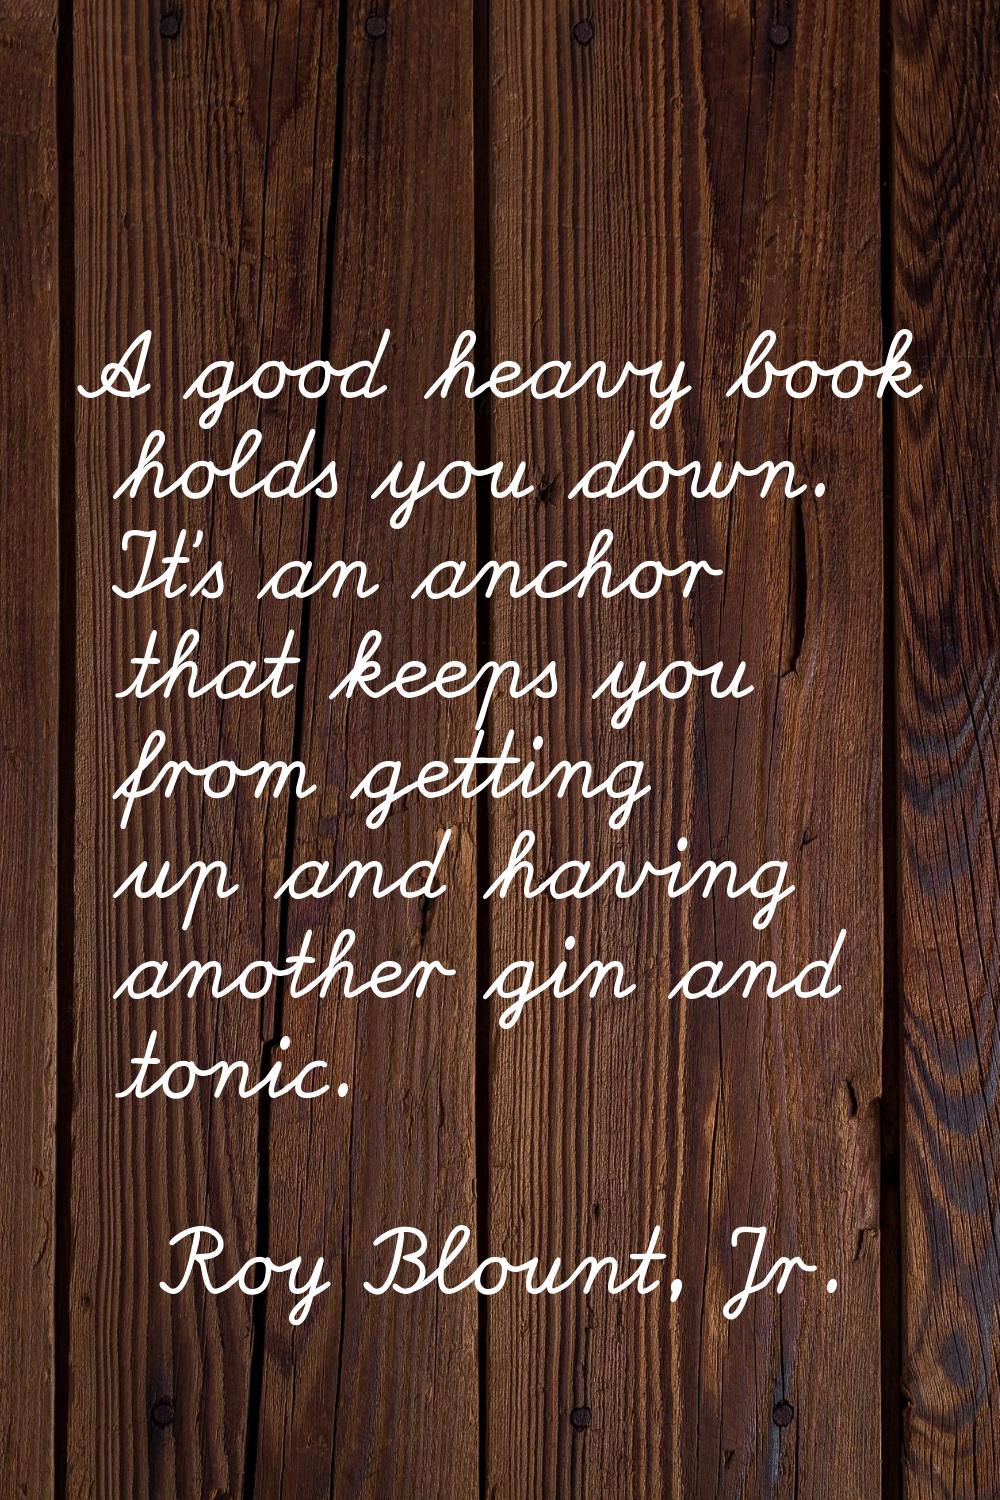 A good heavy book holds you down. It's an anchor that keeps you from getting up and having another 